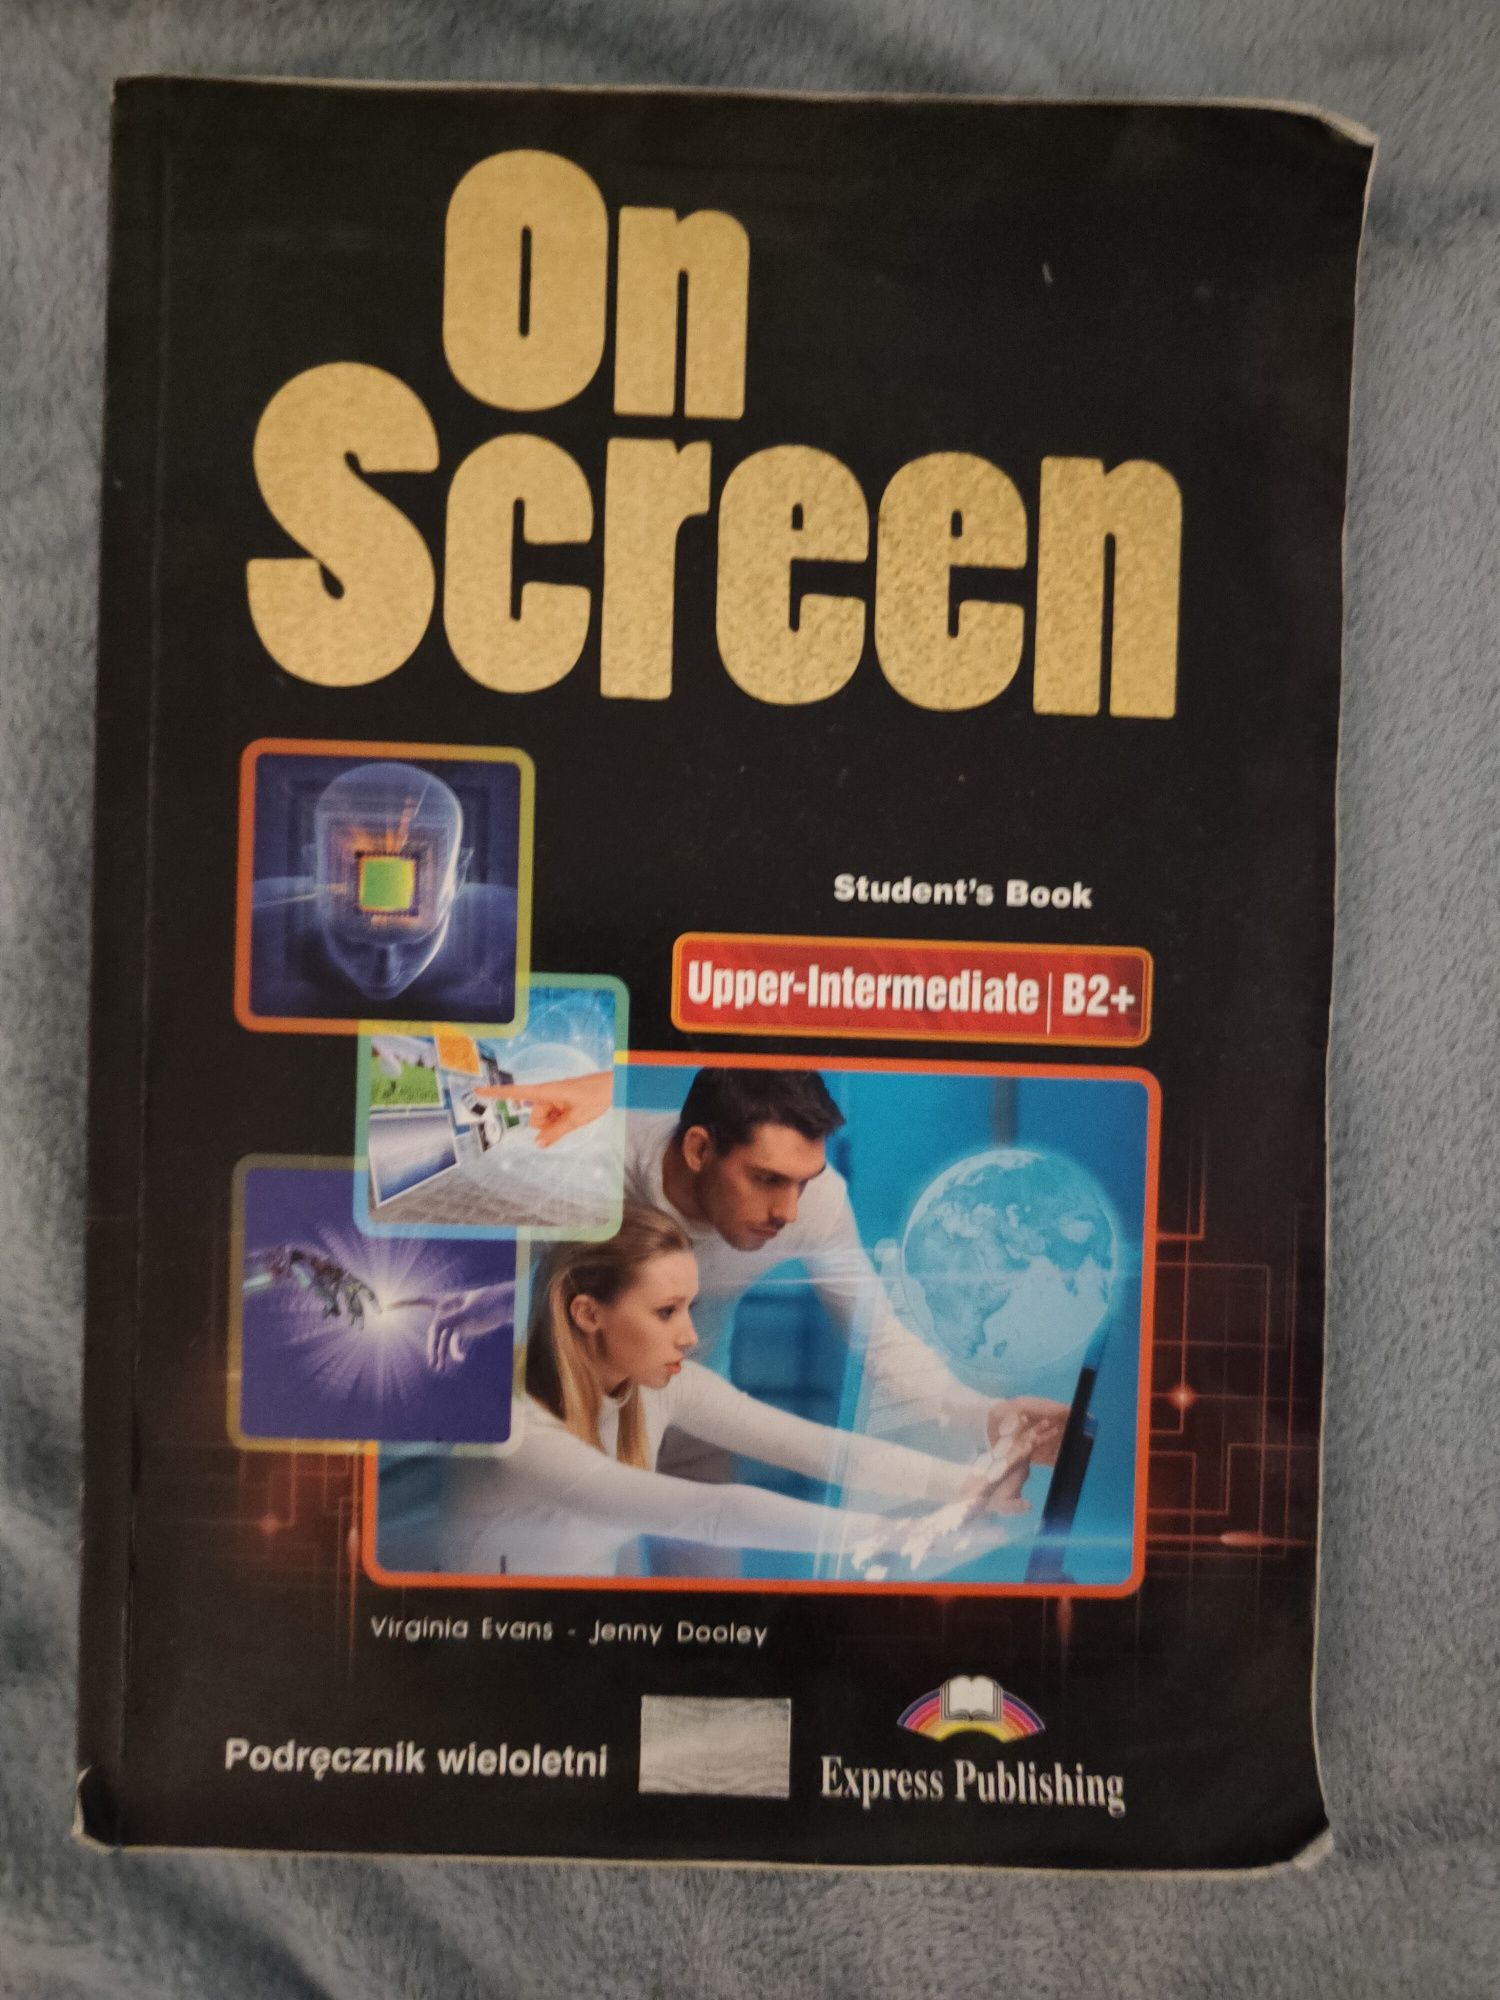 On Screen B2+ - Student's Book